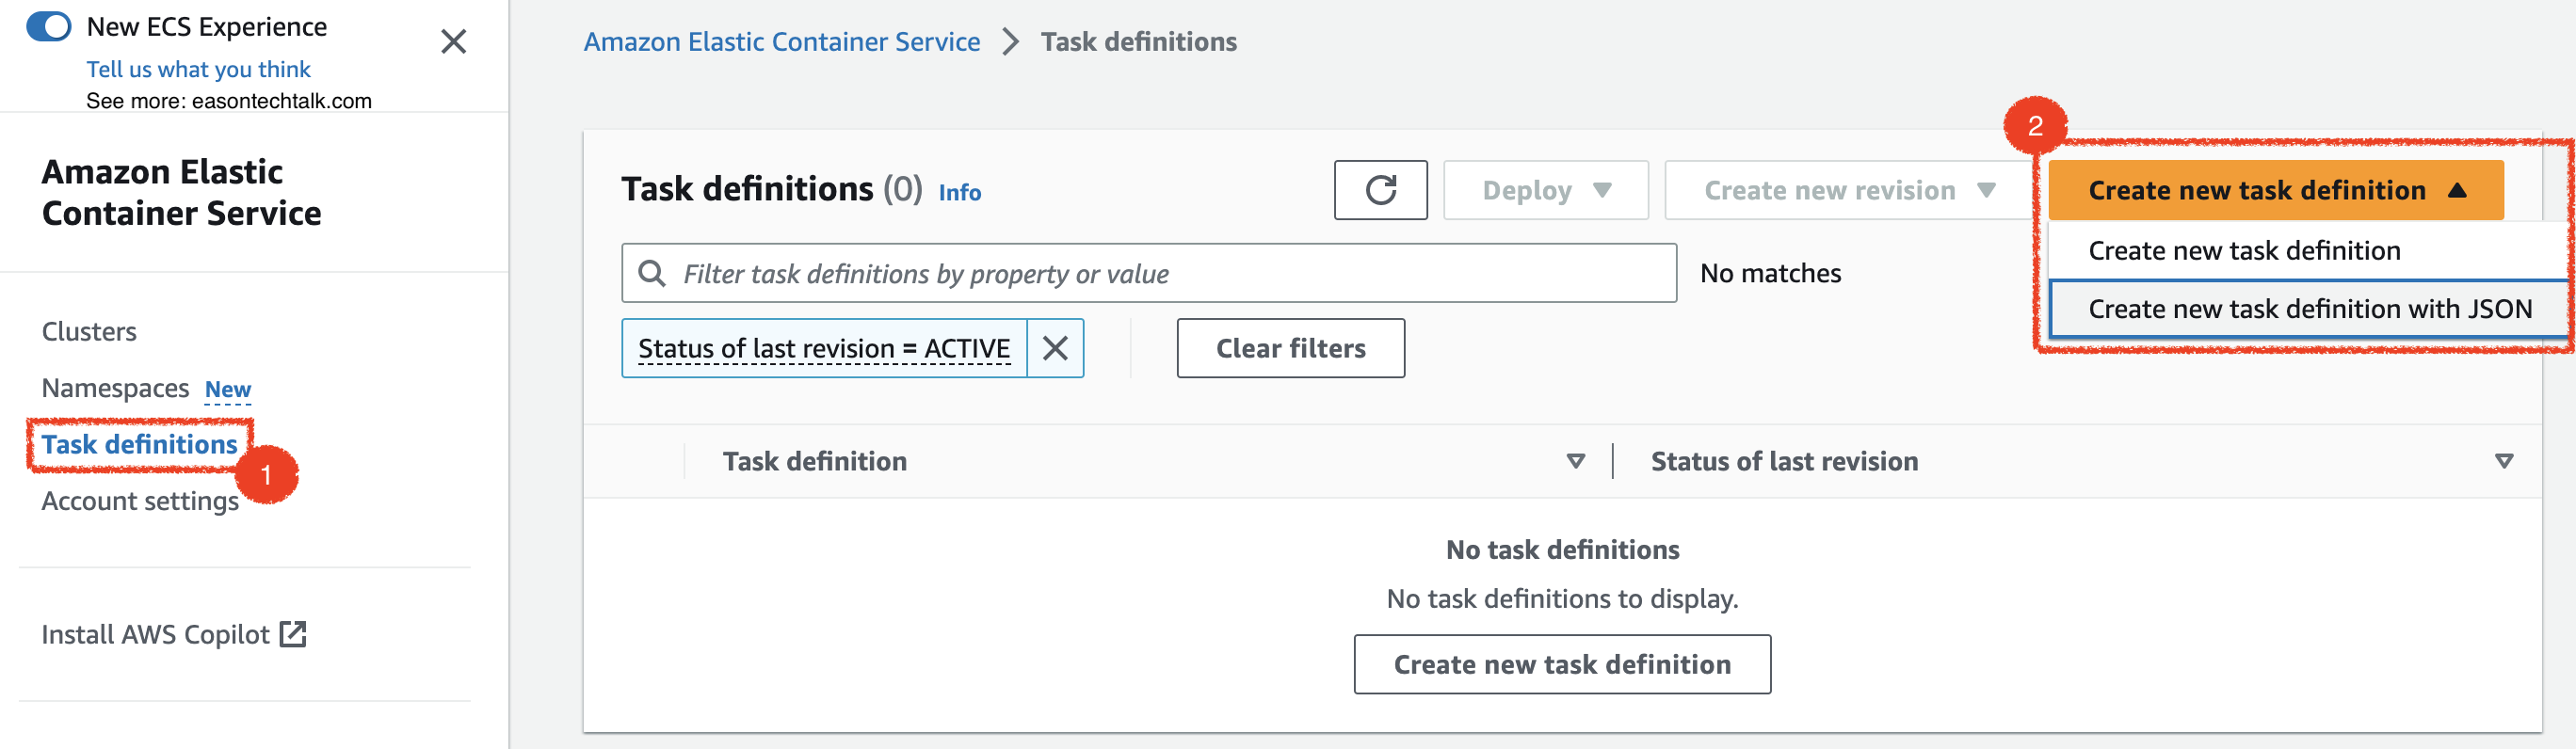 Create new task definition with JSON